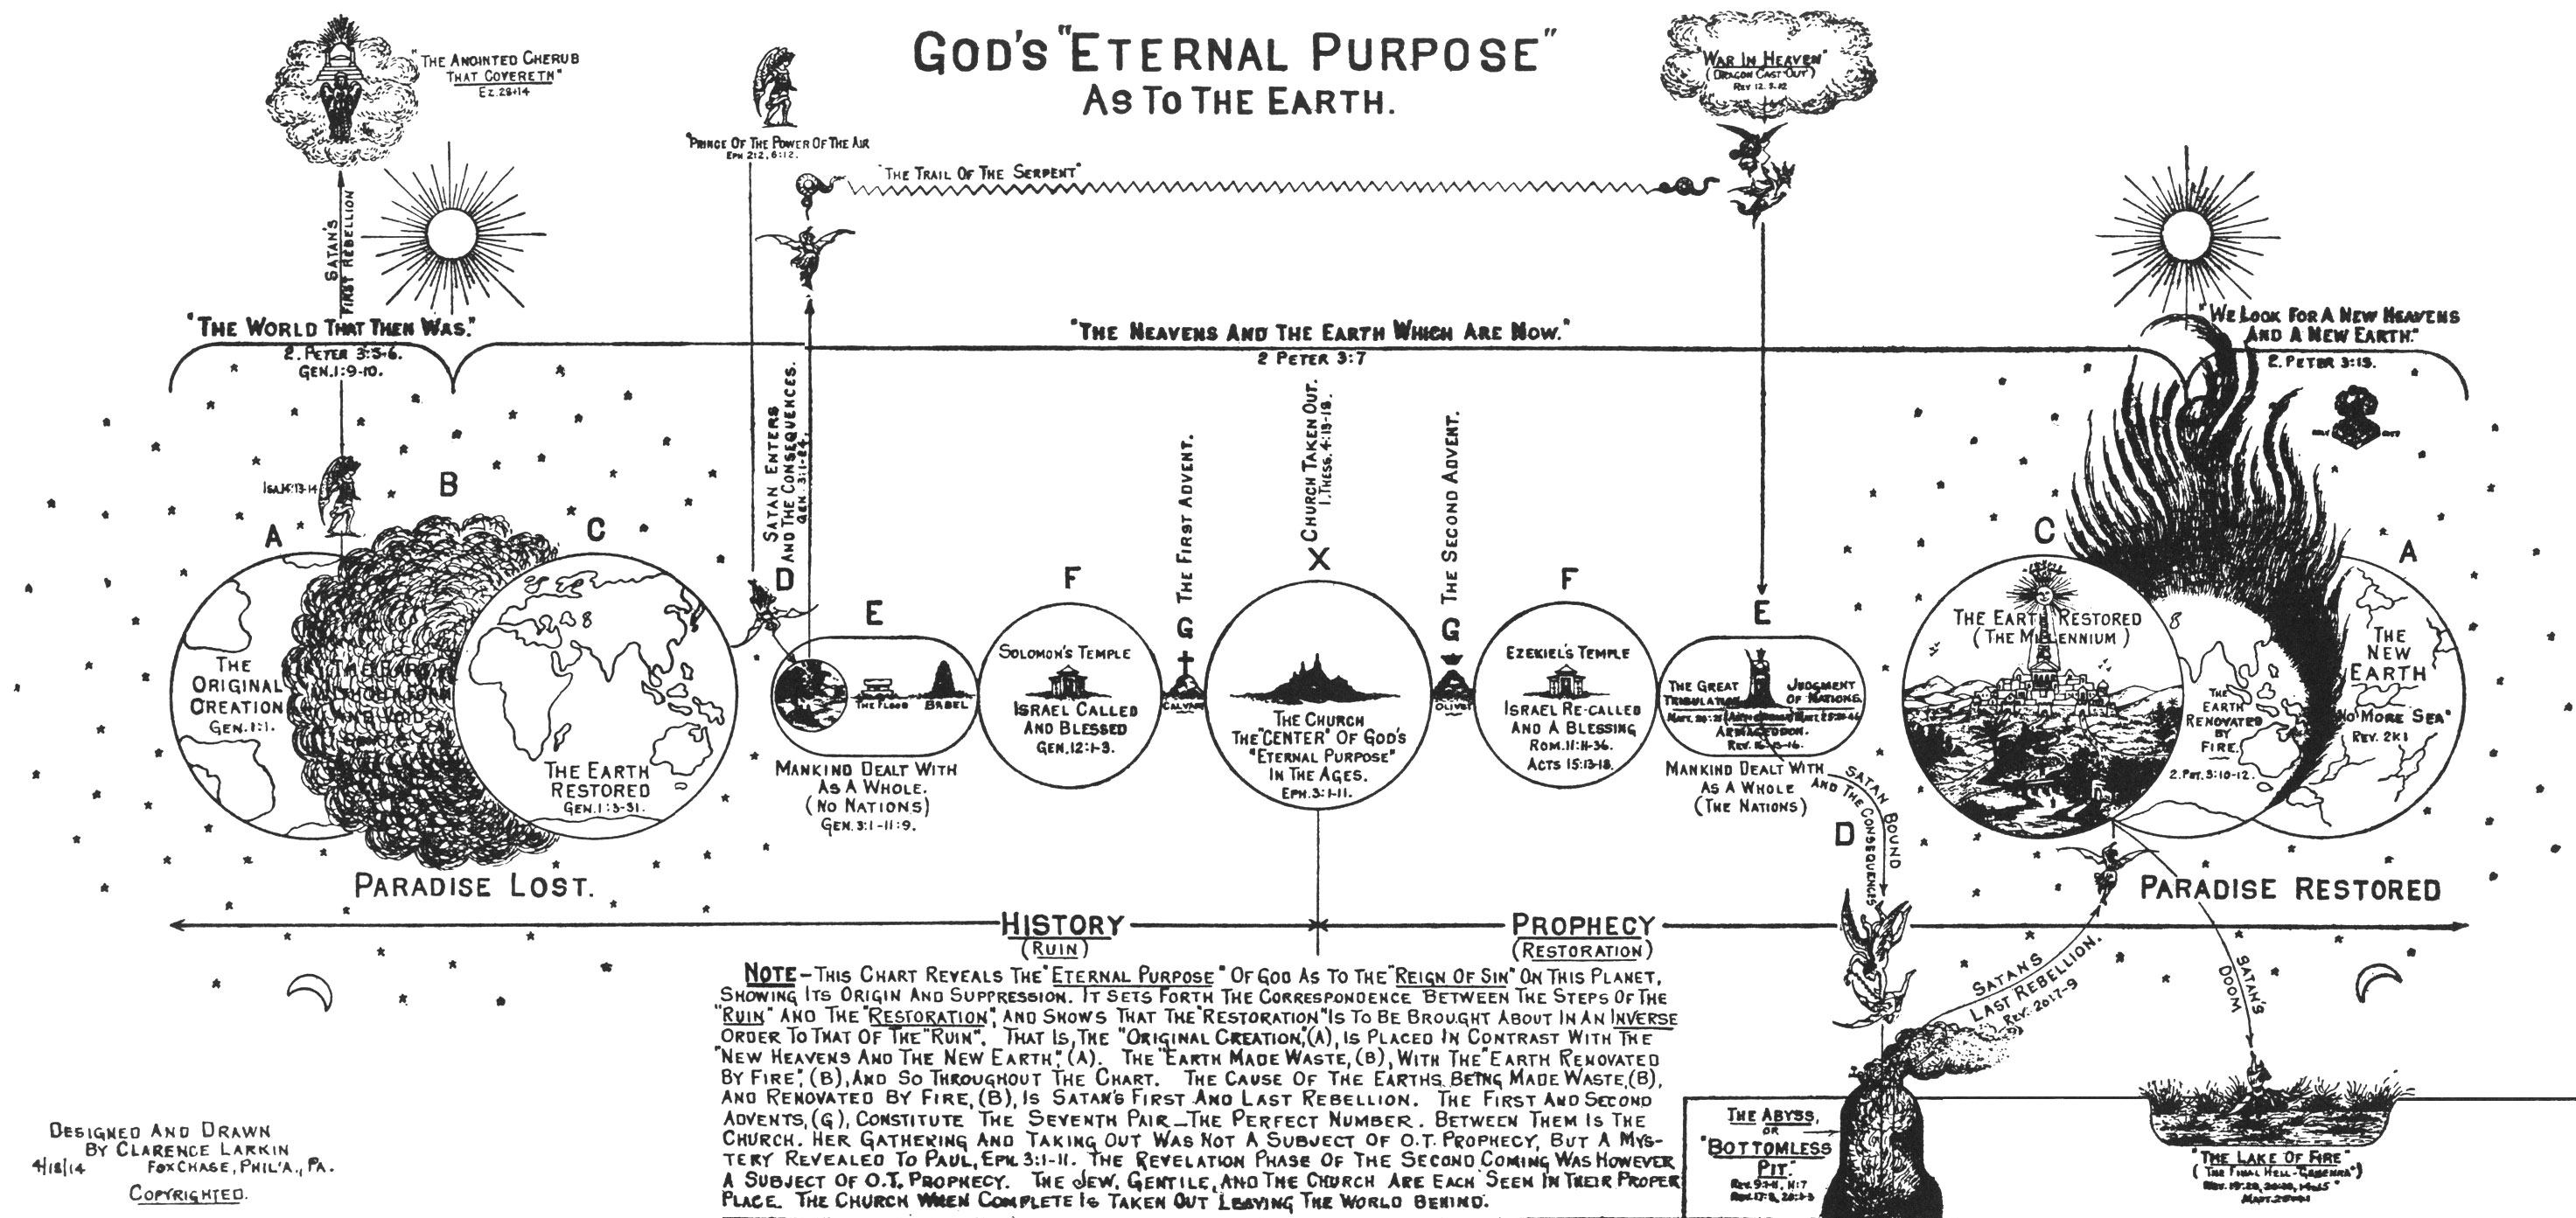 God's Eternal Purpose as to the Earth Illustration by Clarence Larkin